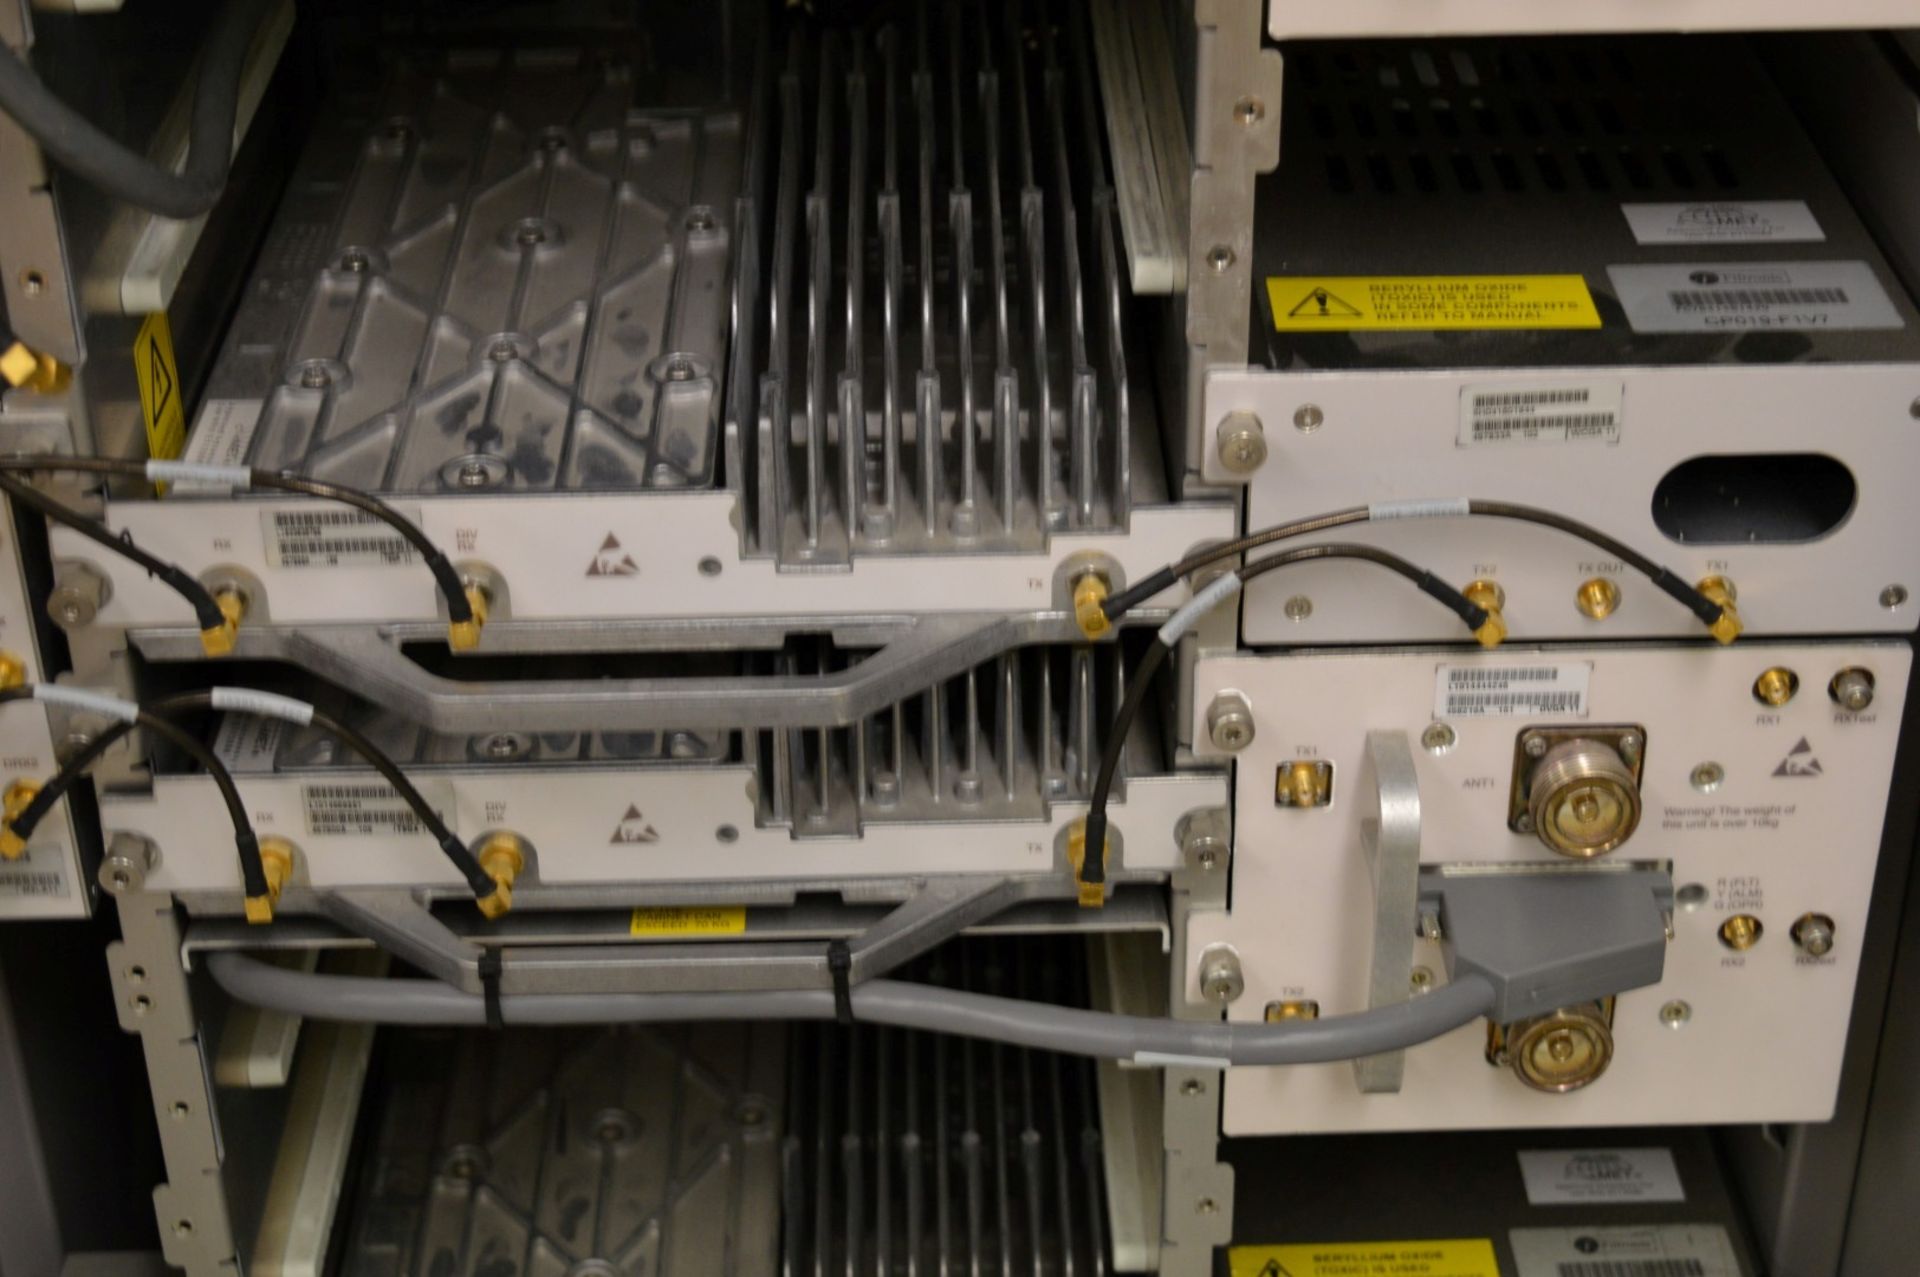 1 x Selection of Nokia Siemens Test Room Equipment Including Loaded Nokia Ultrasite WCDMA Supreme - Image 39 of 72